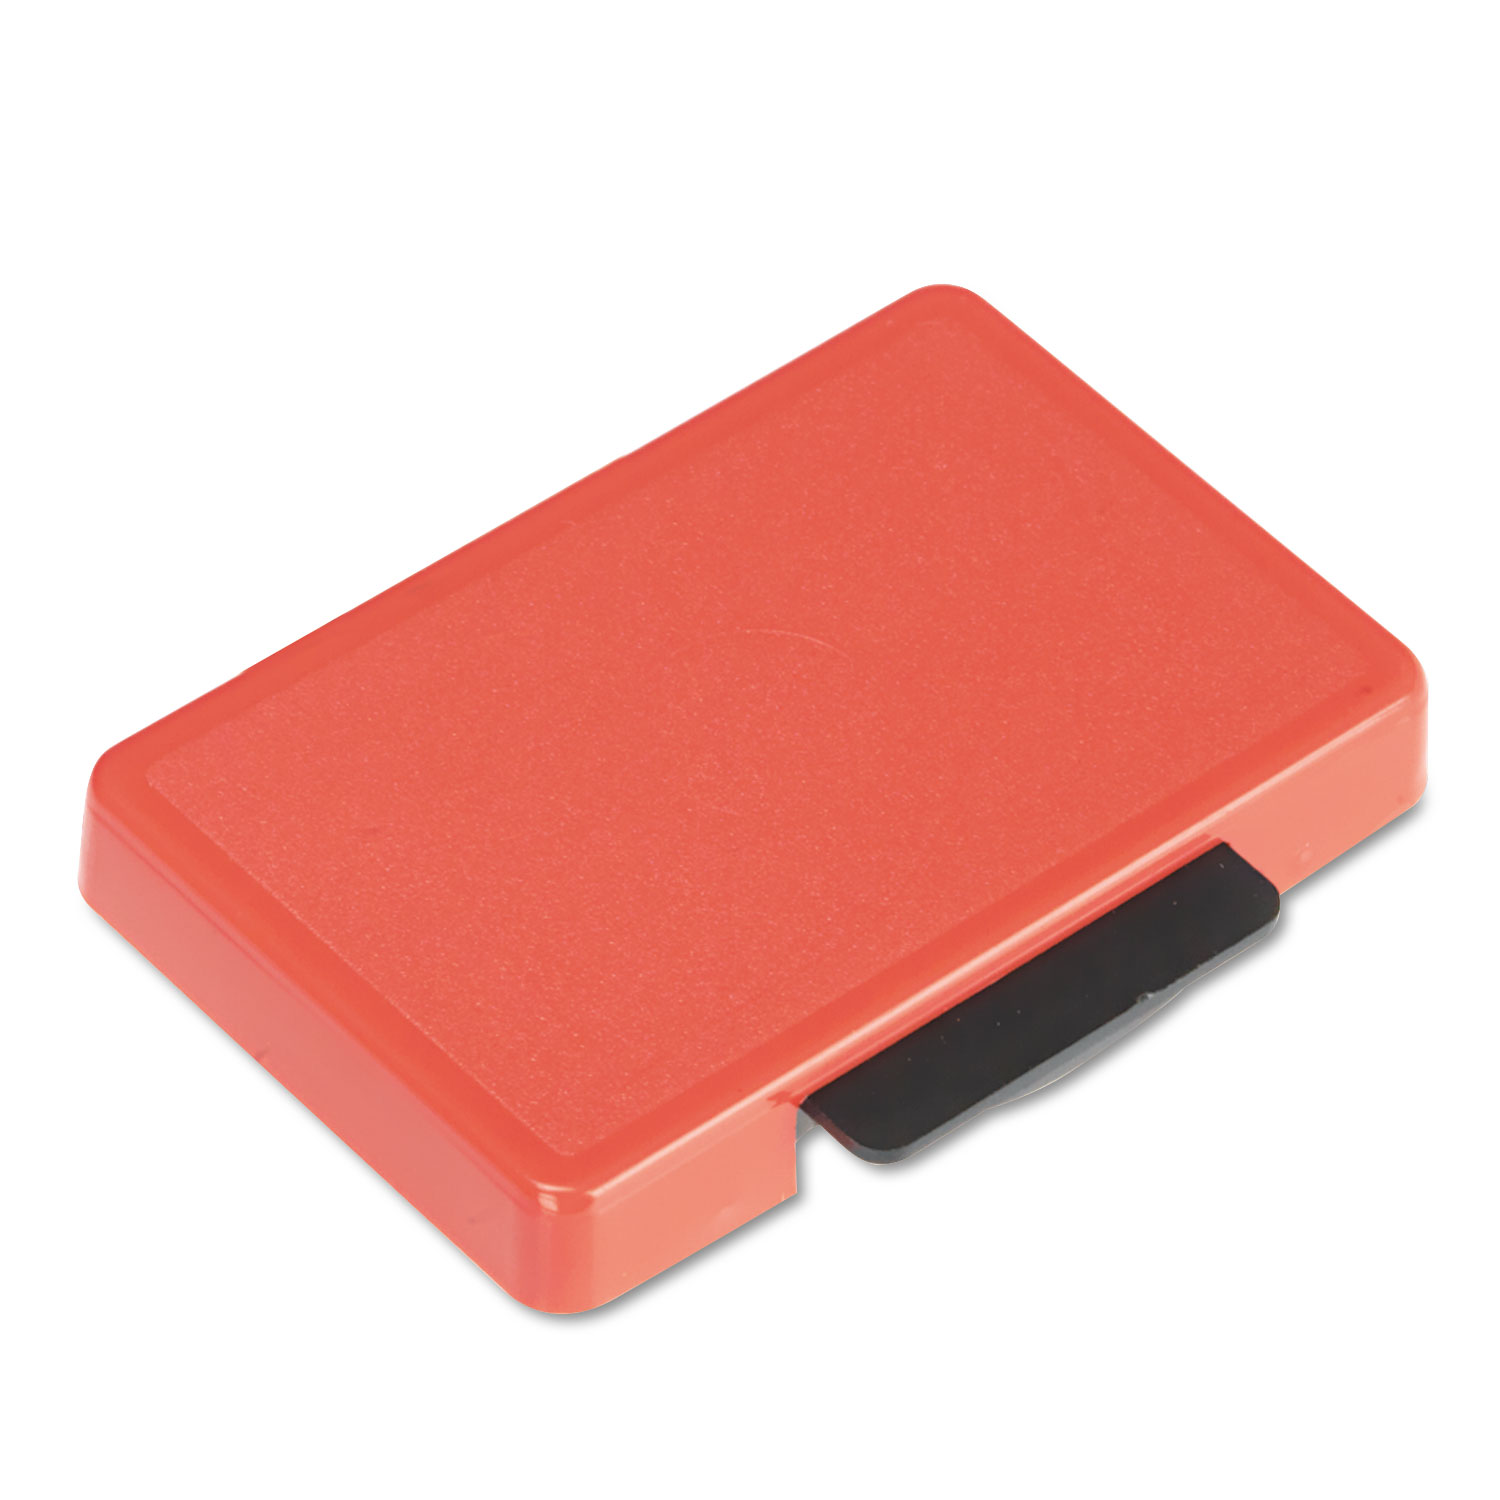  Identity Group P5440RE T5440 Dater Replacement Ink Pad, 1 1/8 x 2, Red (USSP5440RD) 